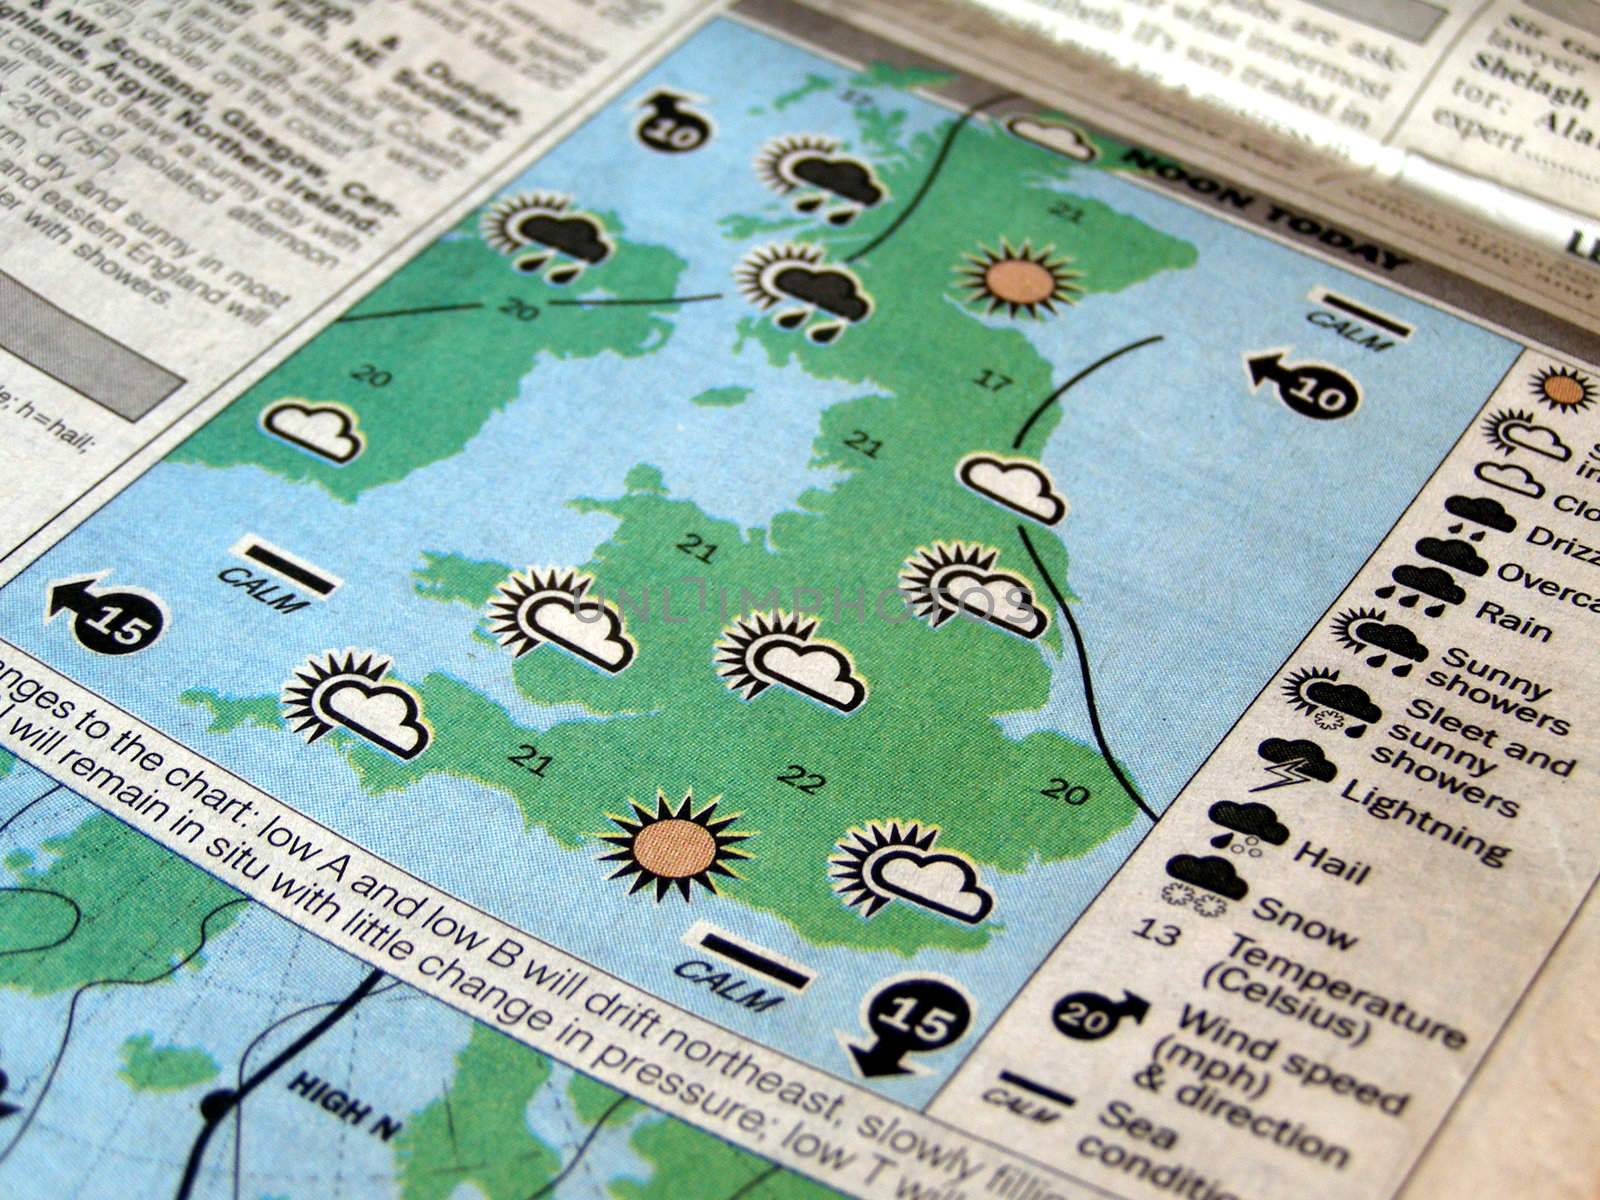 Weather forecast map on a newspaper